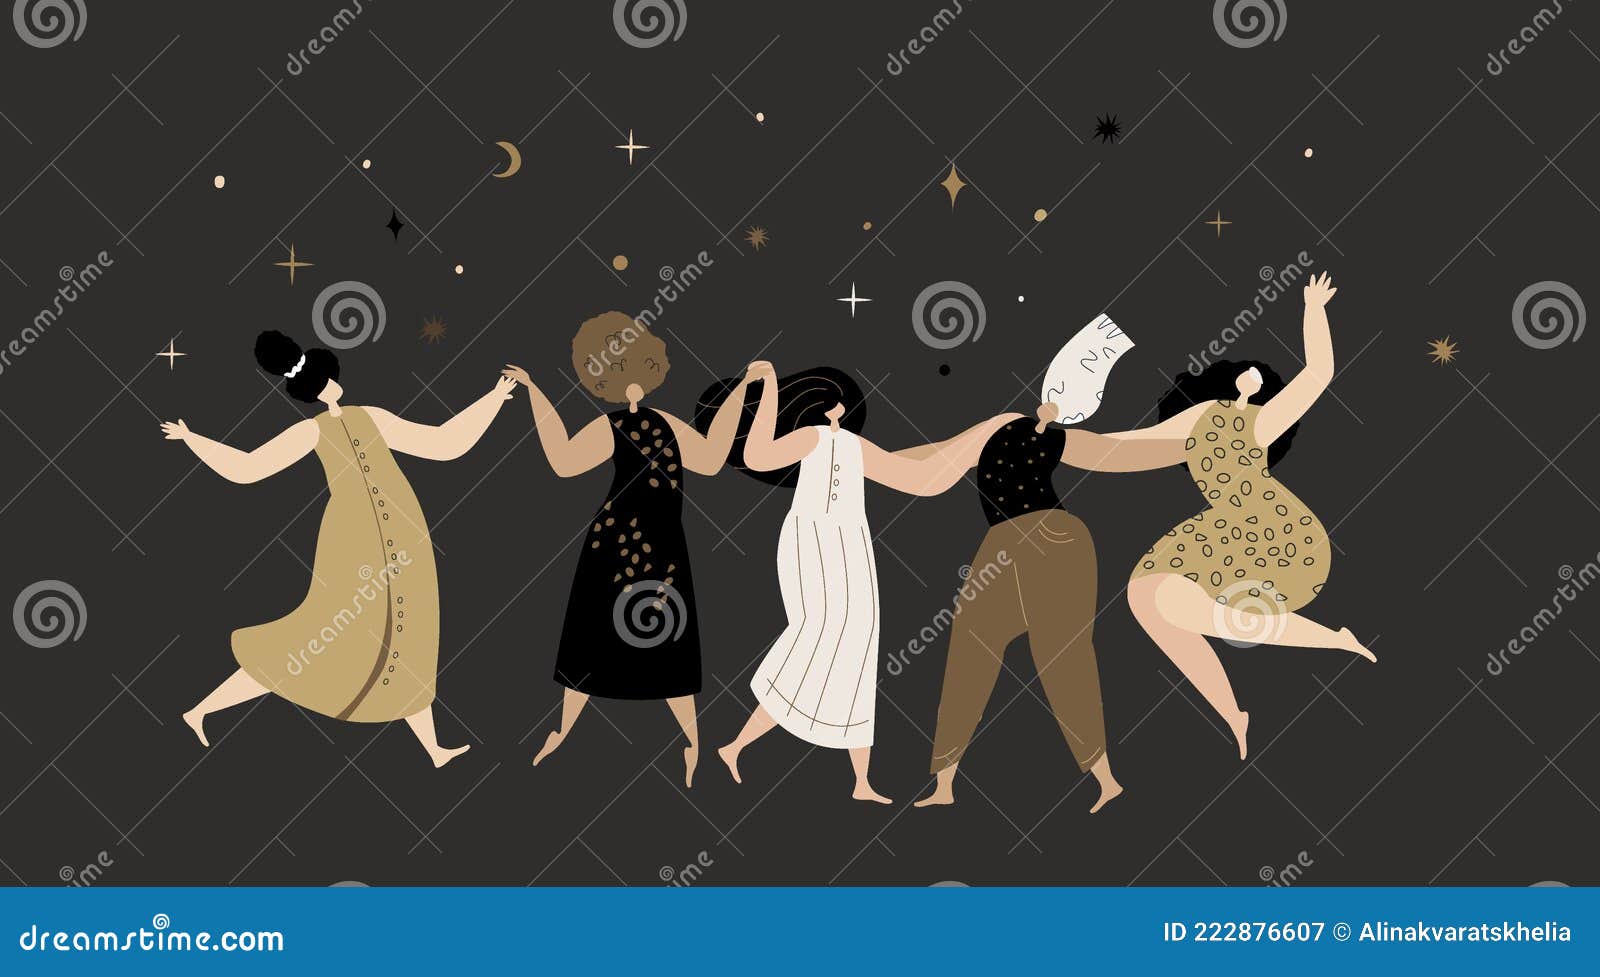 happy feminine party woman festival.women dancing in female circle together. ritual dance together.esoterics sacred woman power.